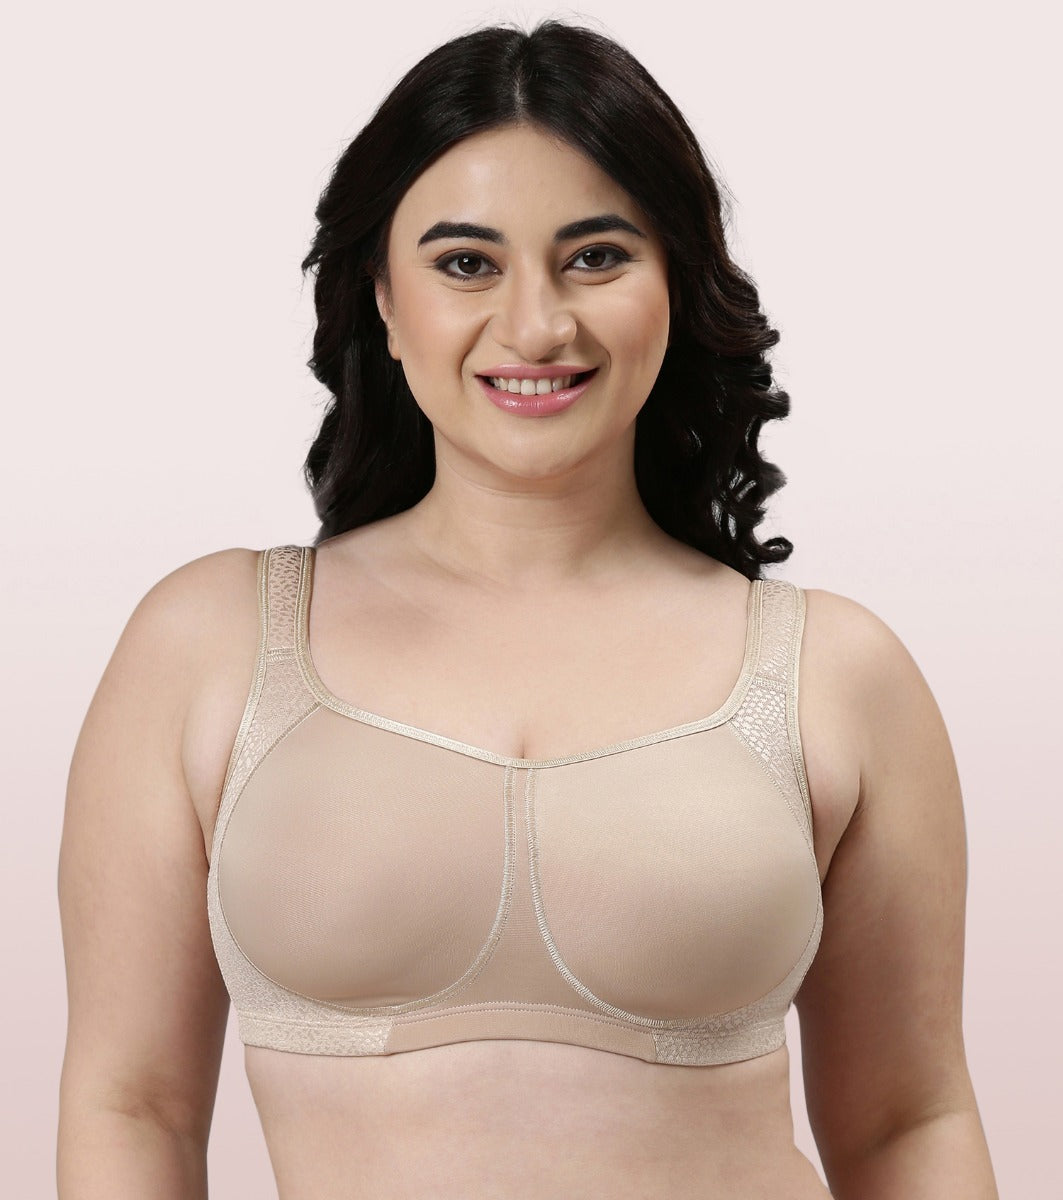 13% OFF on Fittme Full Coverage Minimizer Bra on Snapdeal